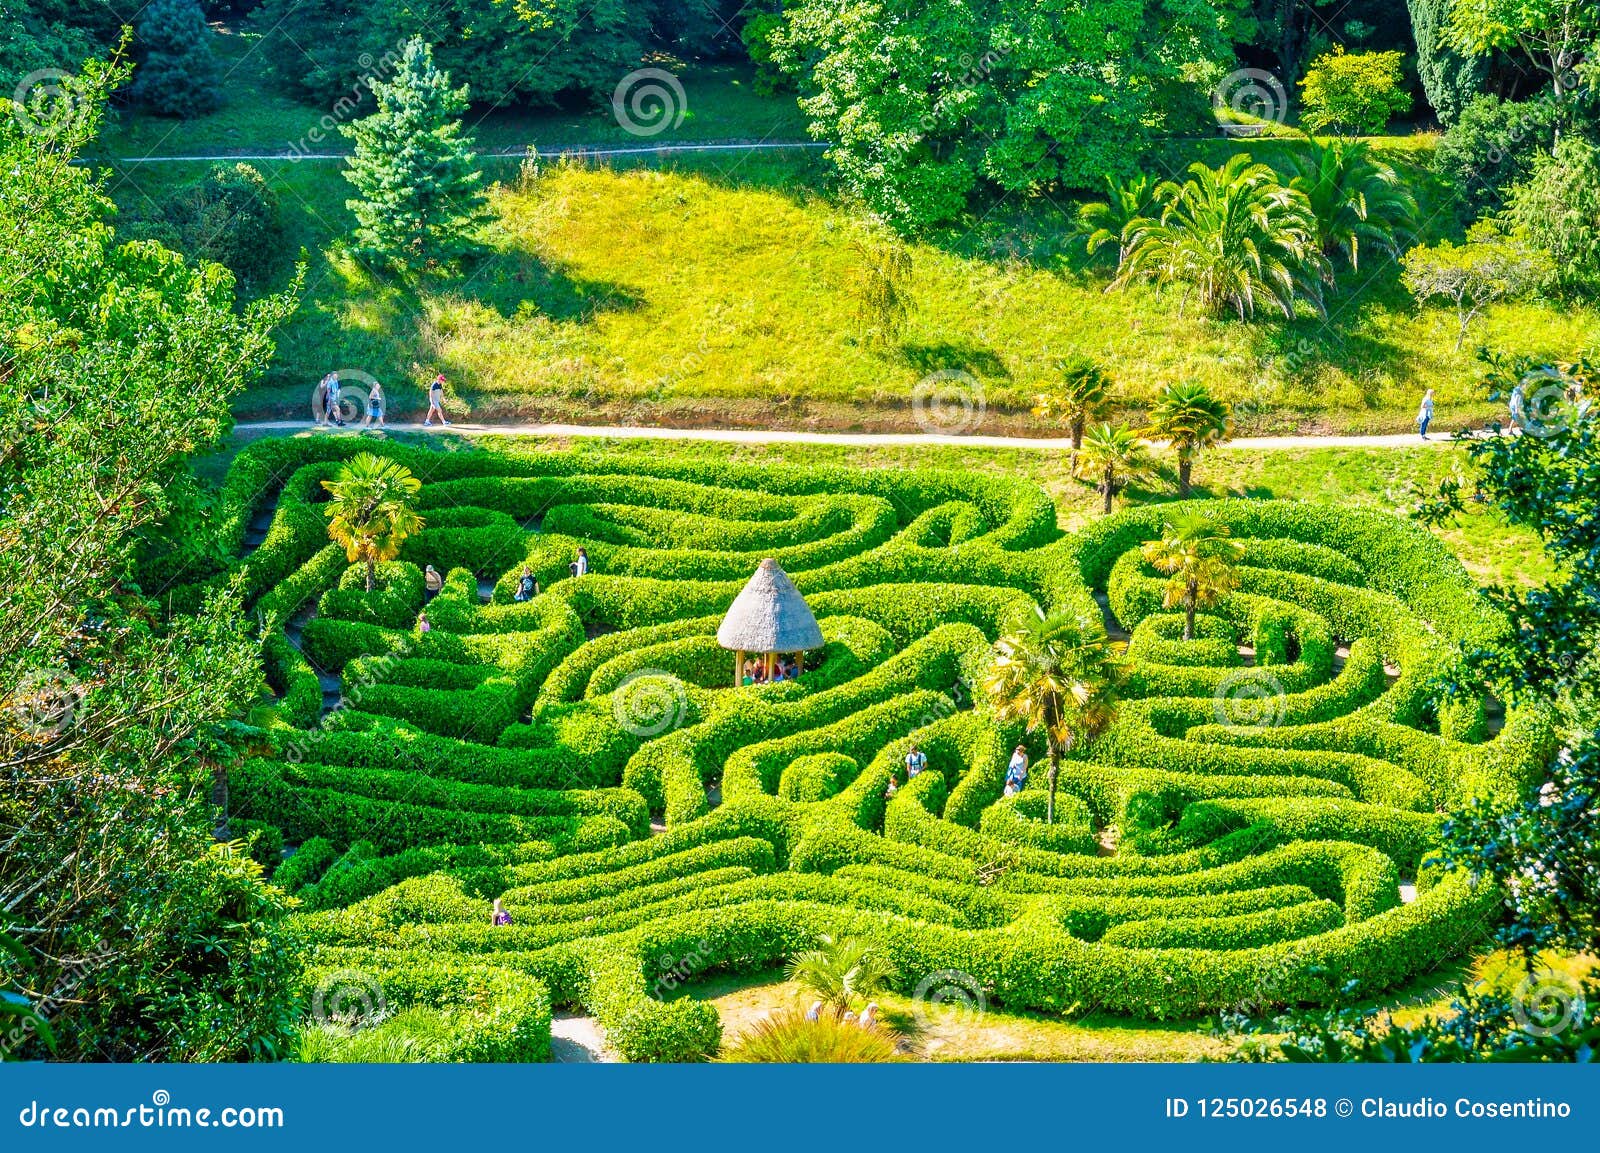 photograph of a park in the form of a labyrinth. cornwall, uk.